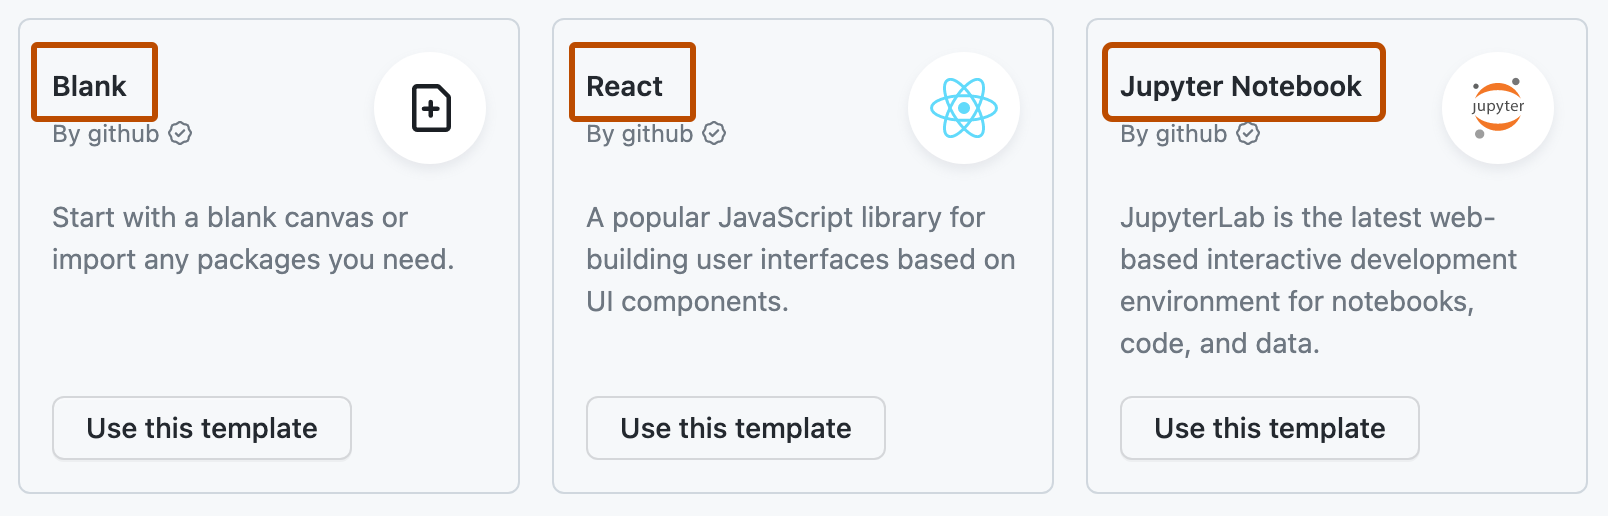 Screenshot of the "Explore quick start templates" section, with "React" highlighted